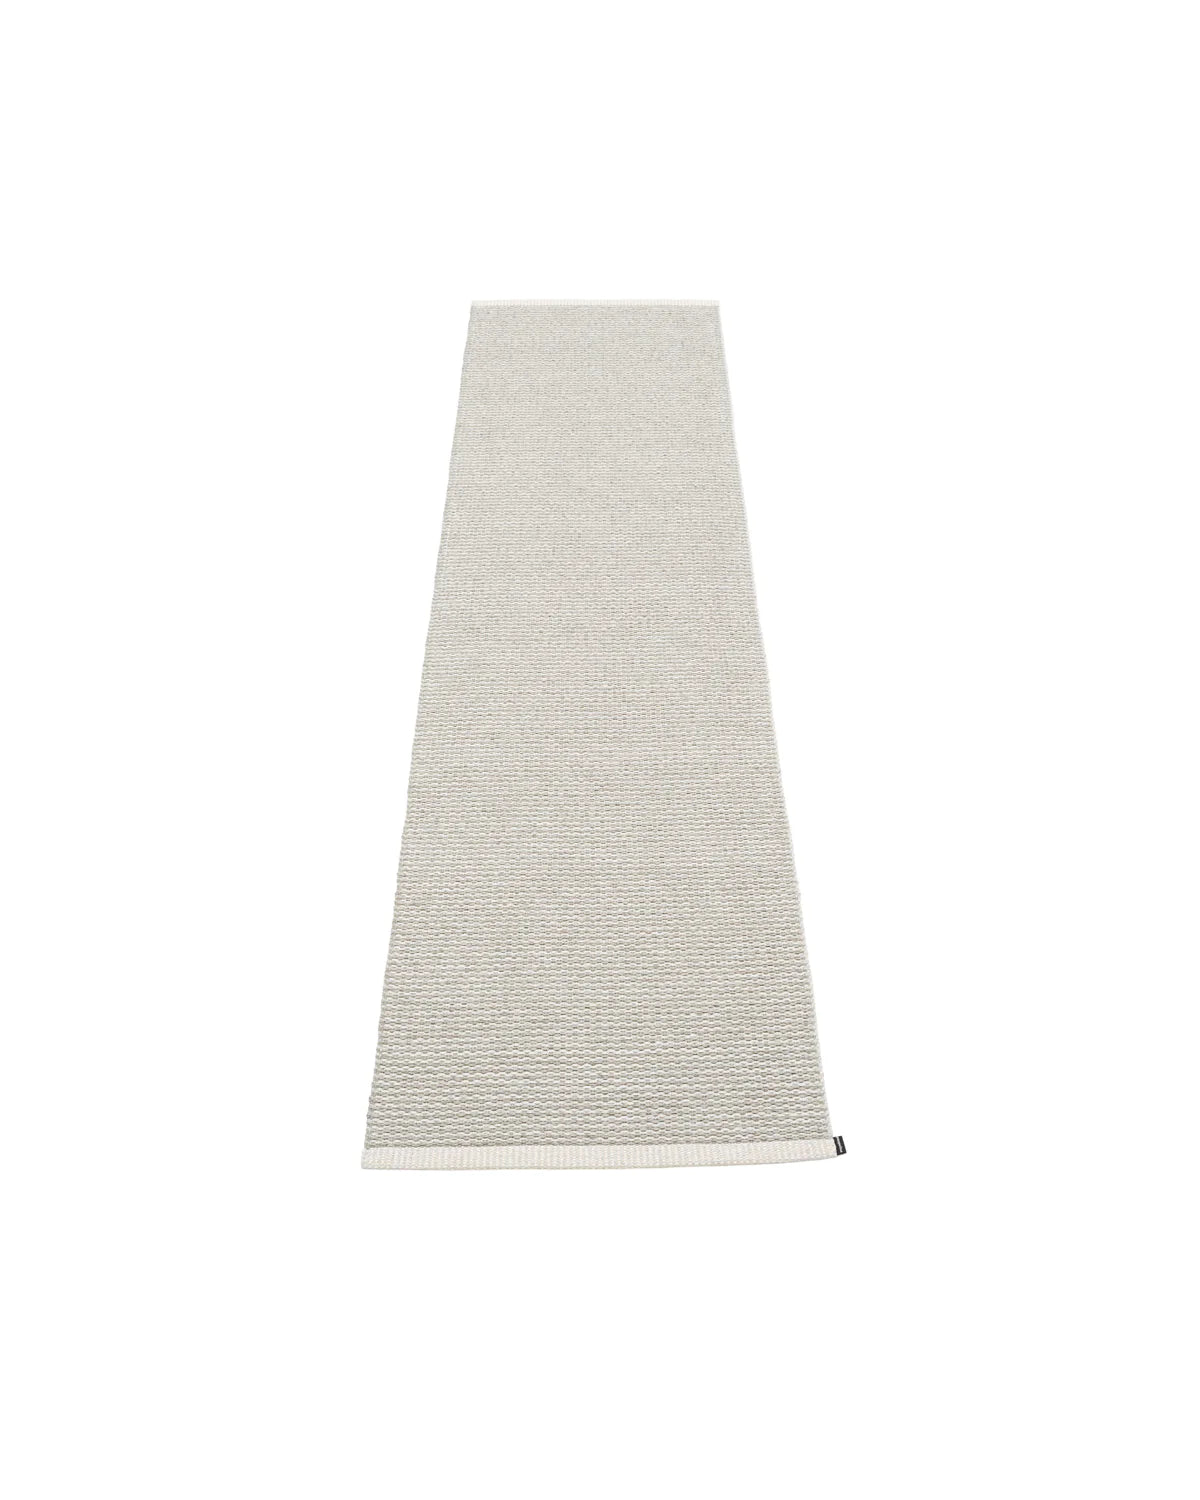 Pappelina Rug Mono Fossil Grey